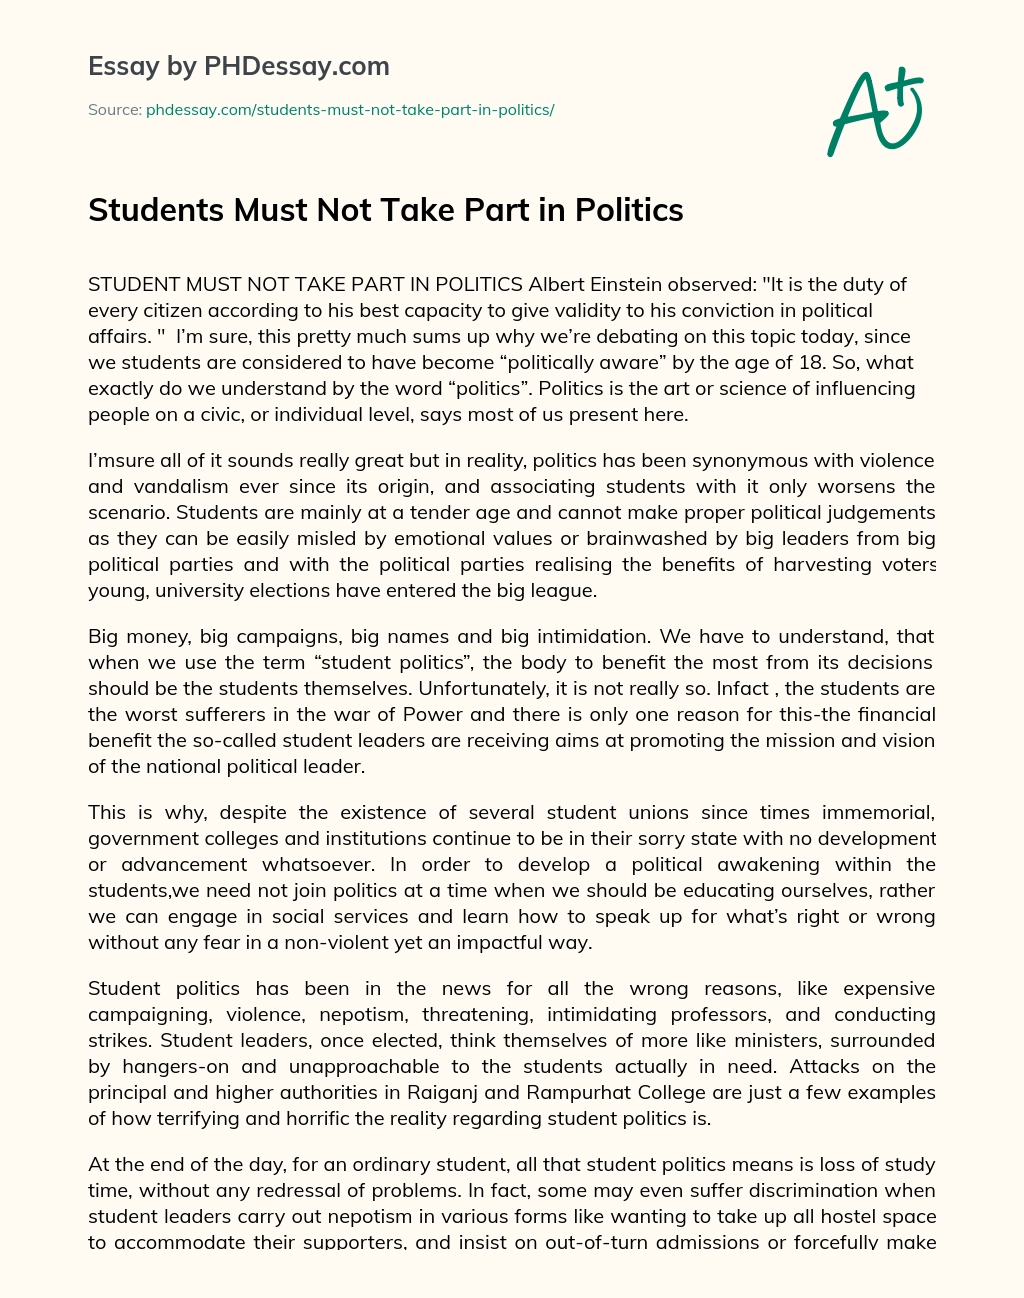 Students Must Not Take Part in Politics essay